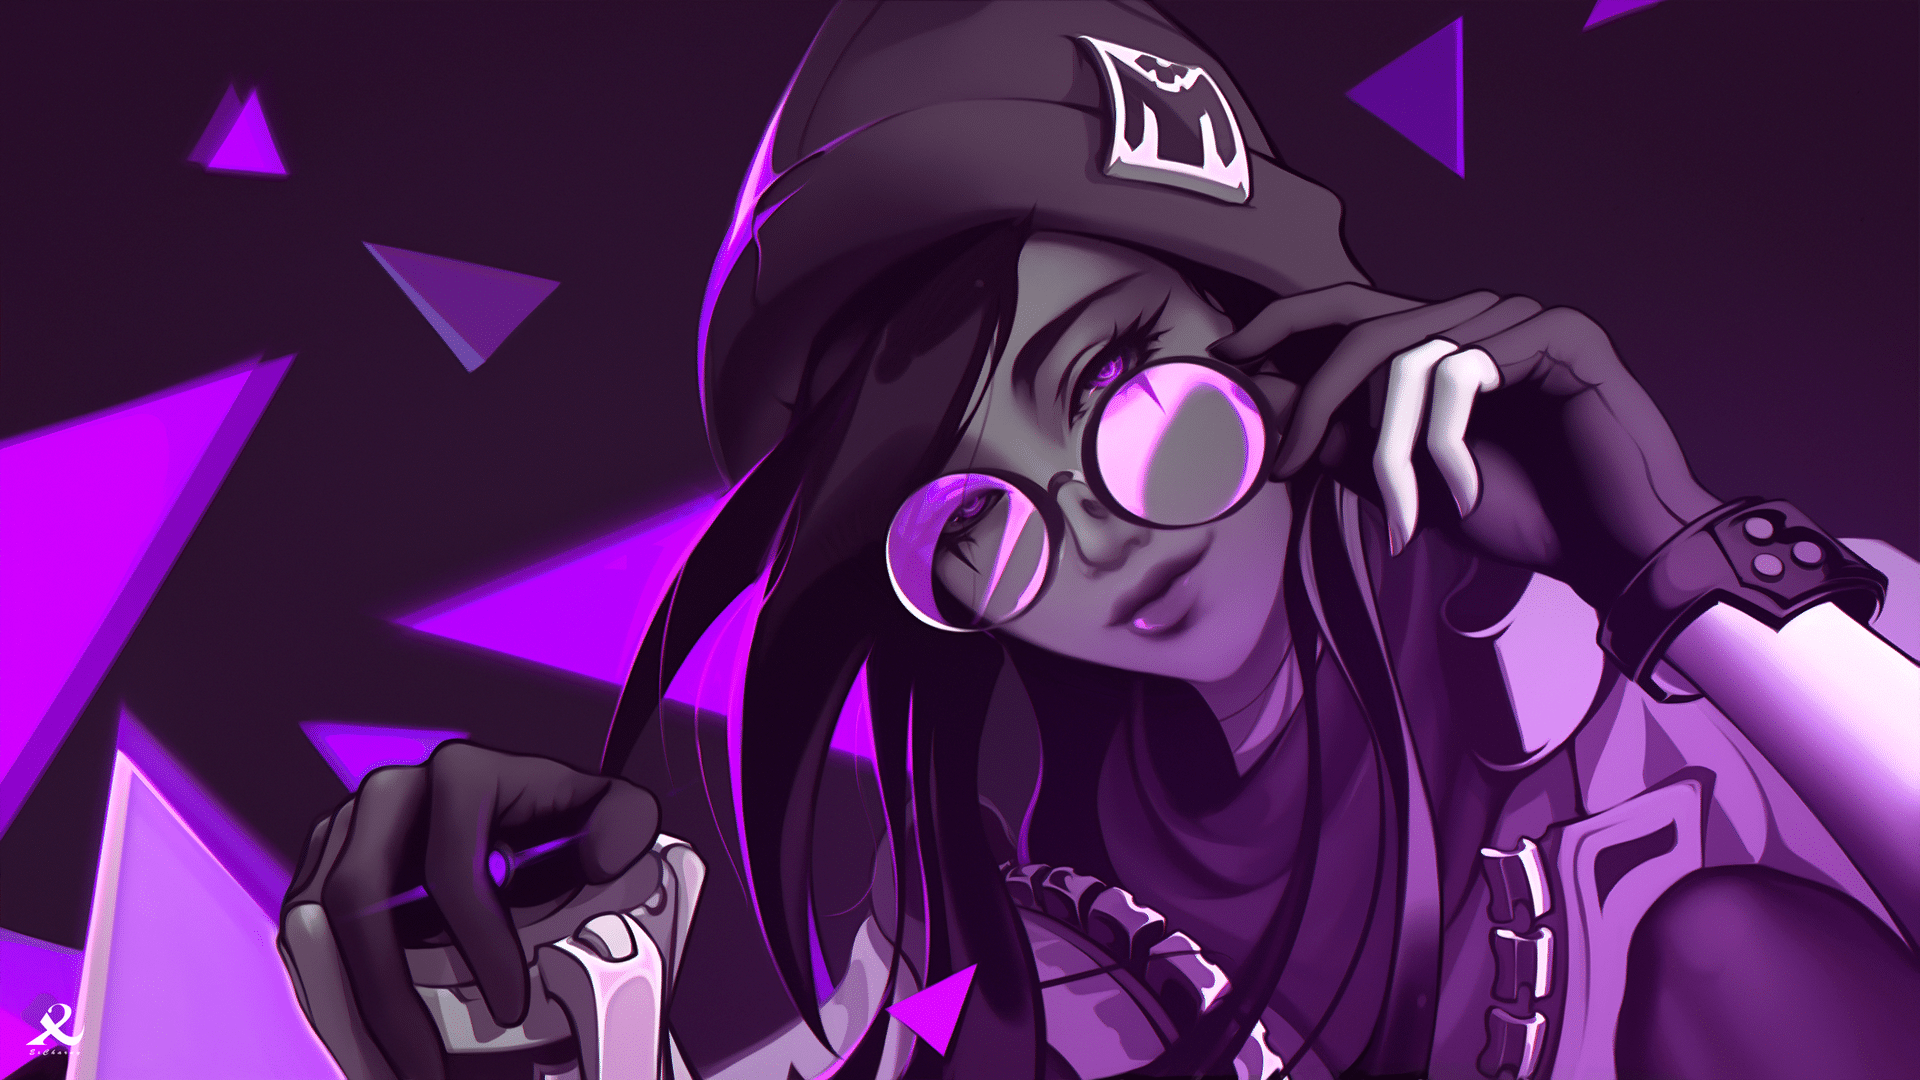 Image by Excharny – Killjoy adjusting her glasses in a purple hue.